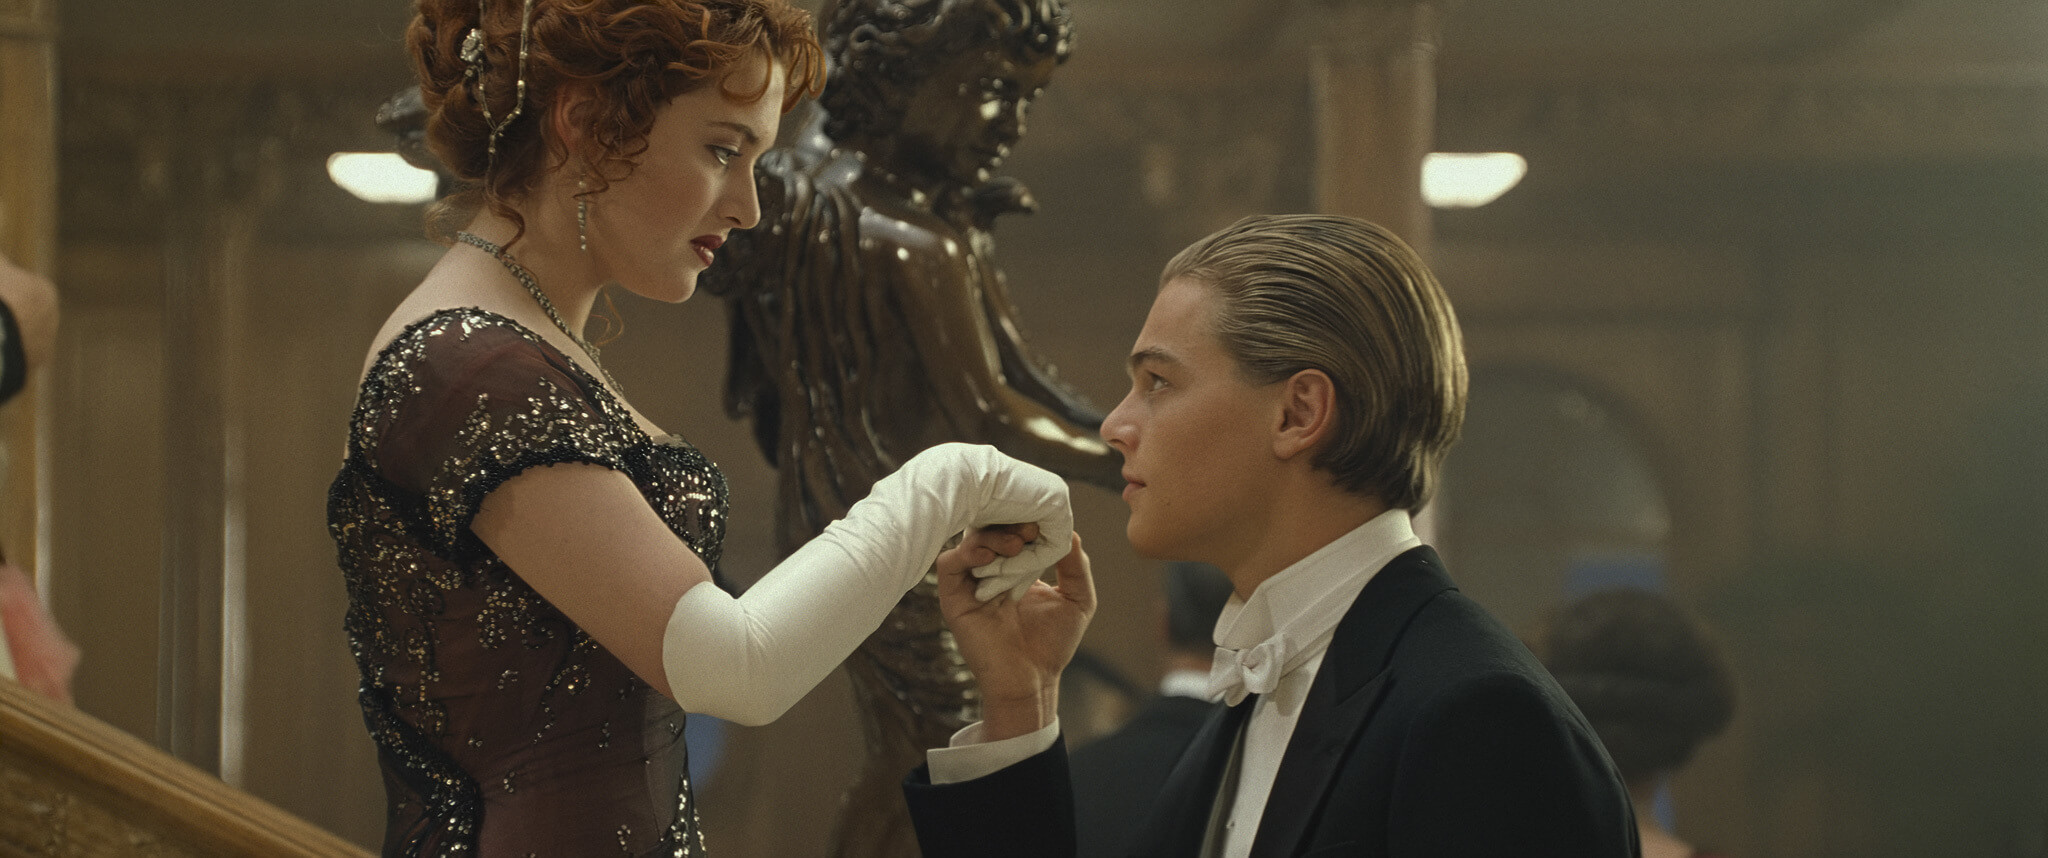 "It's been 25 years..." Titanic rerelease trailer and images Caution